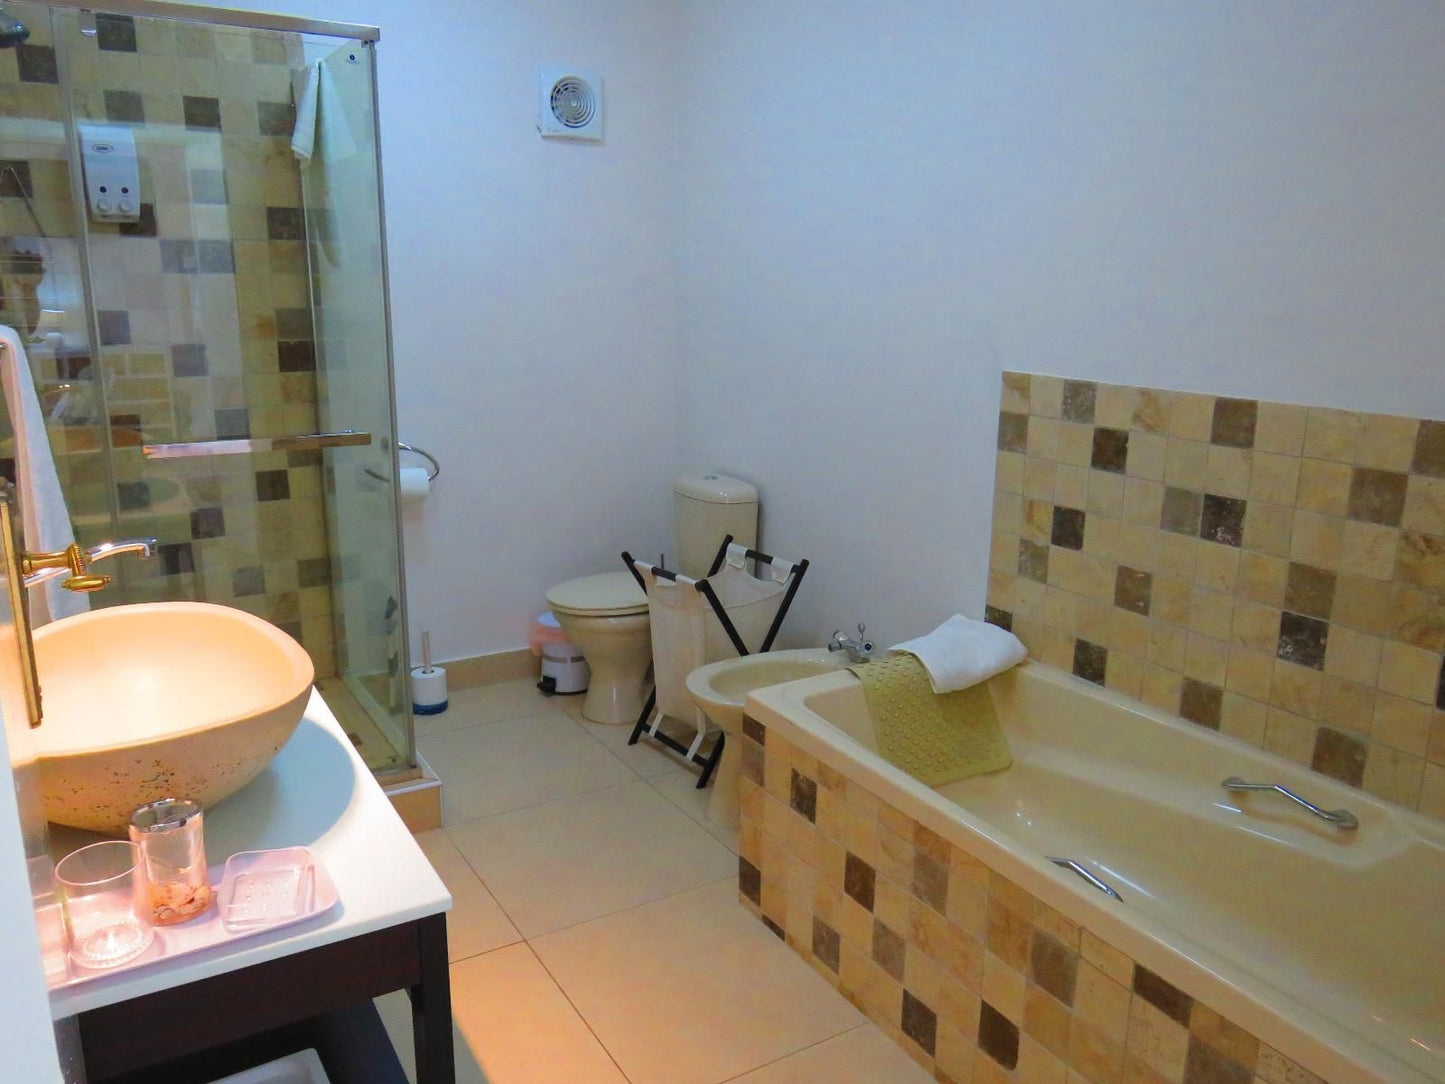 On The Beach Seabreeze Apartment Yzerfontein Western Cape South Africa Bathroom